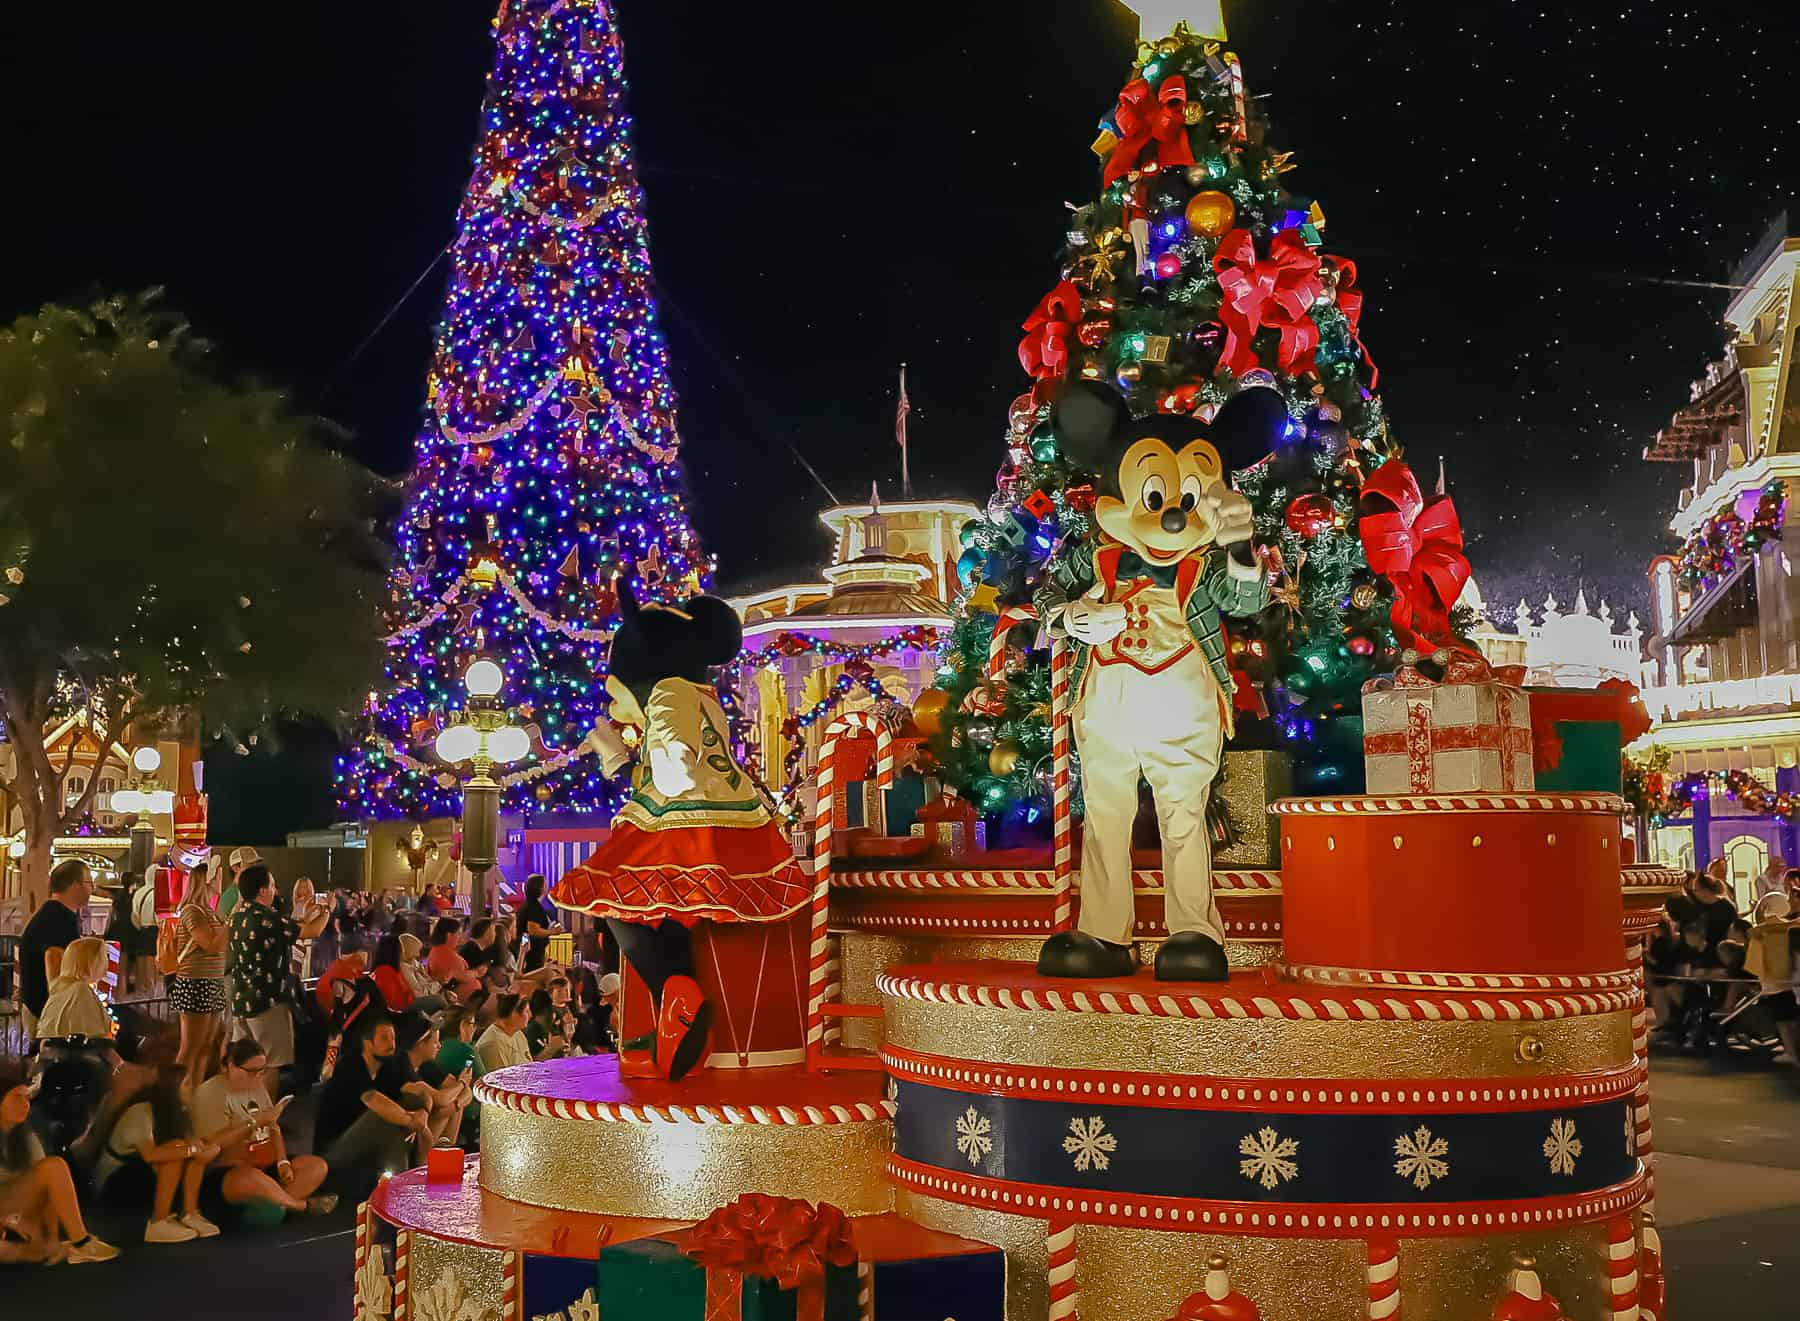 Mickey points to someone in the crowd during the parade with the Christmas tree in the background. 